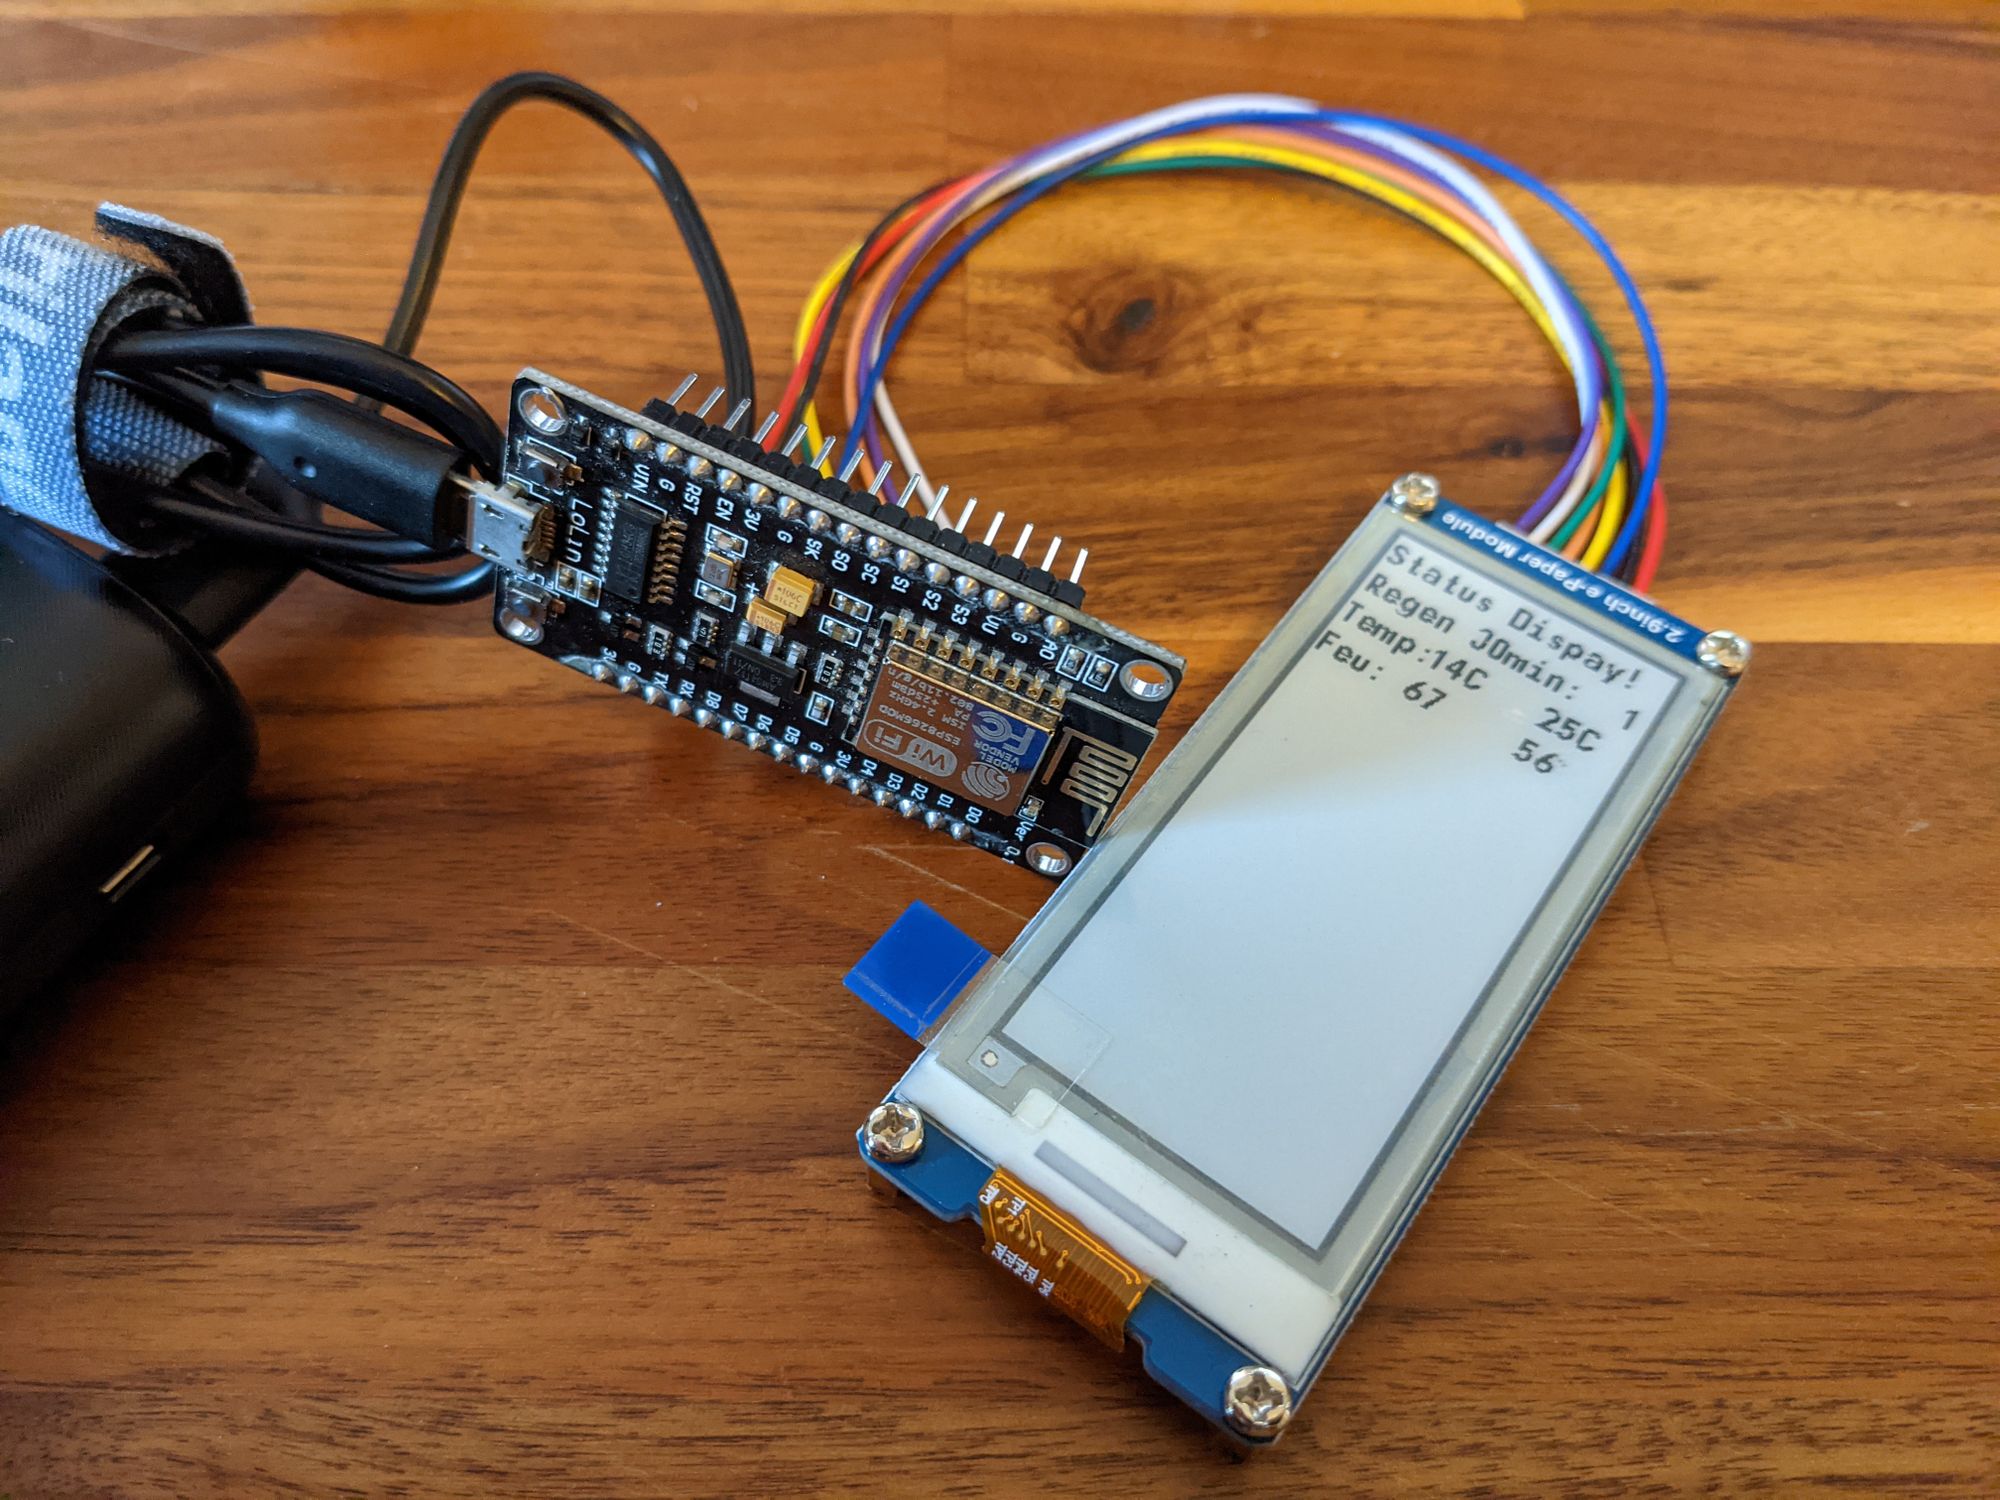 esp8266 with E-Ink display showing some Home Assistant sensors values